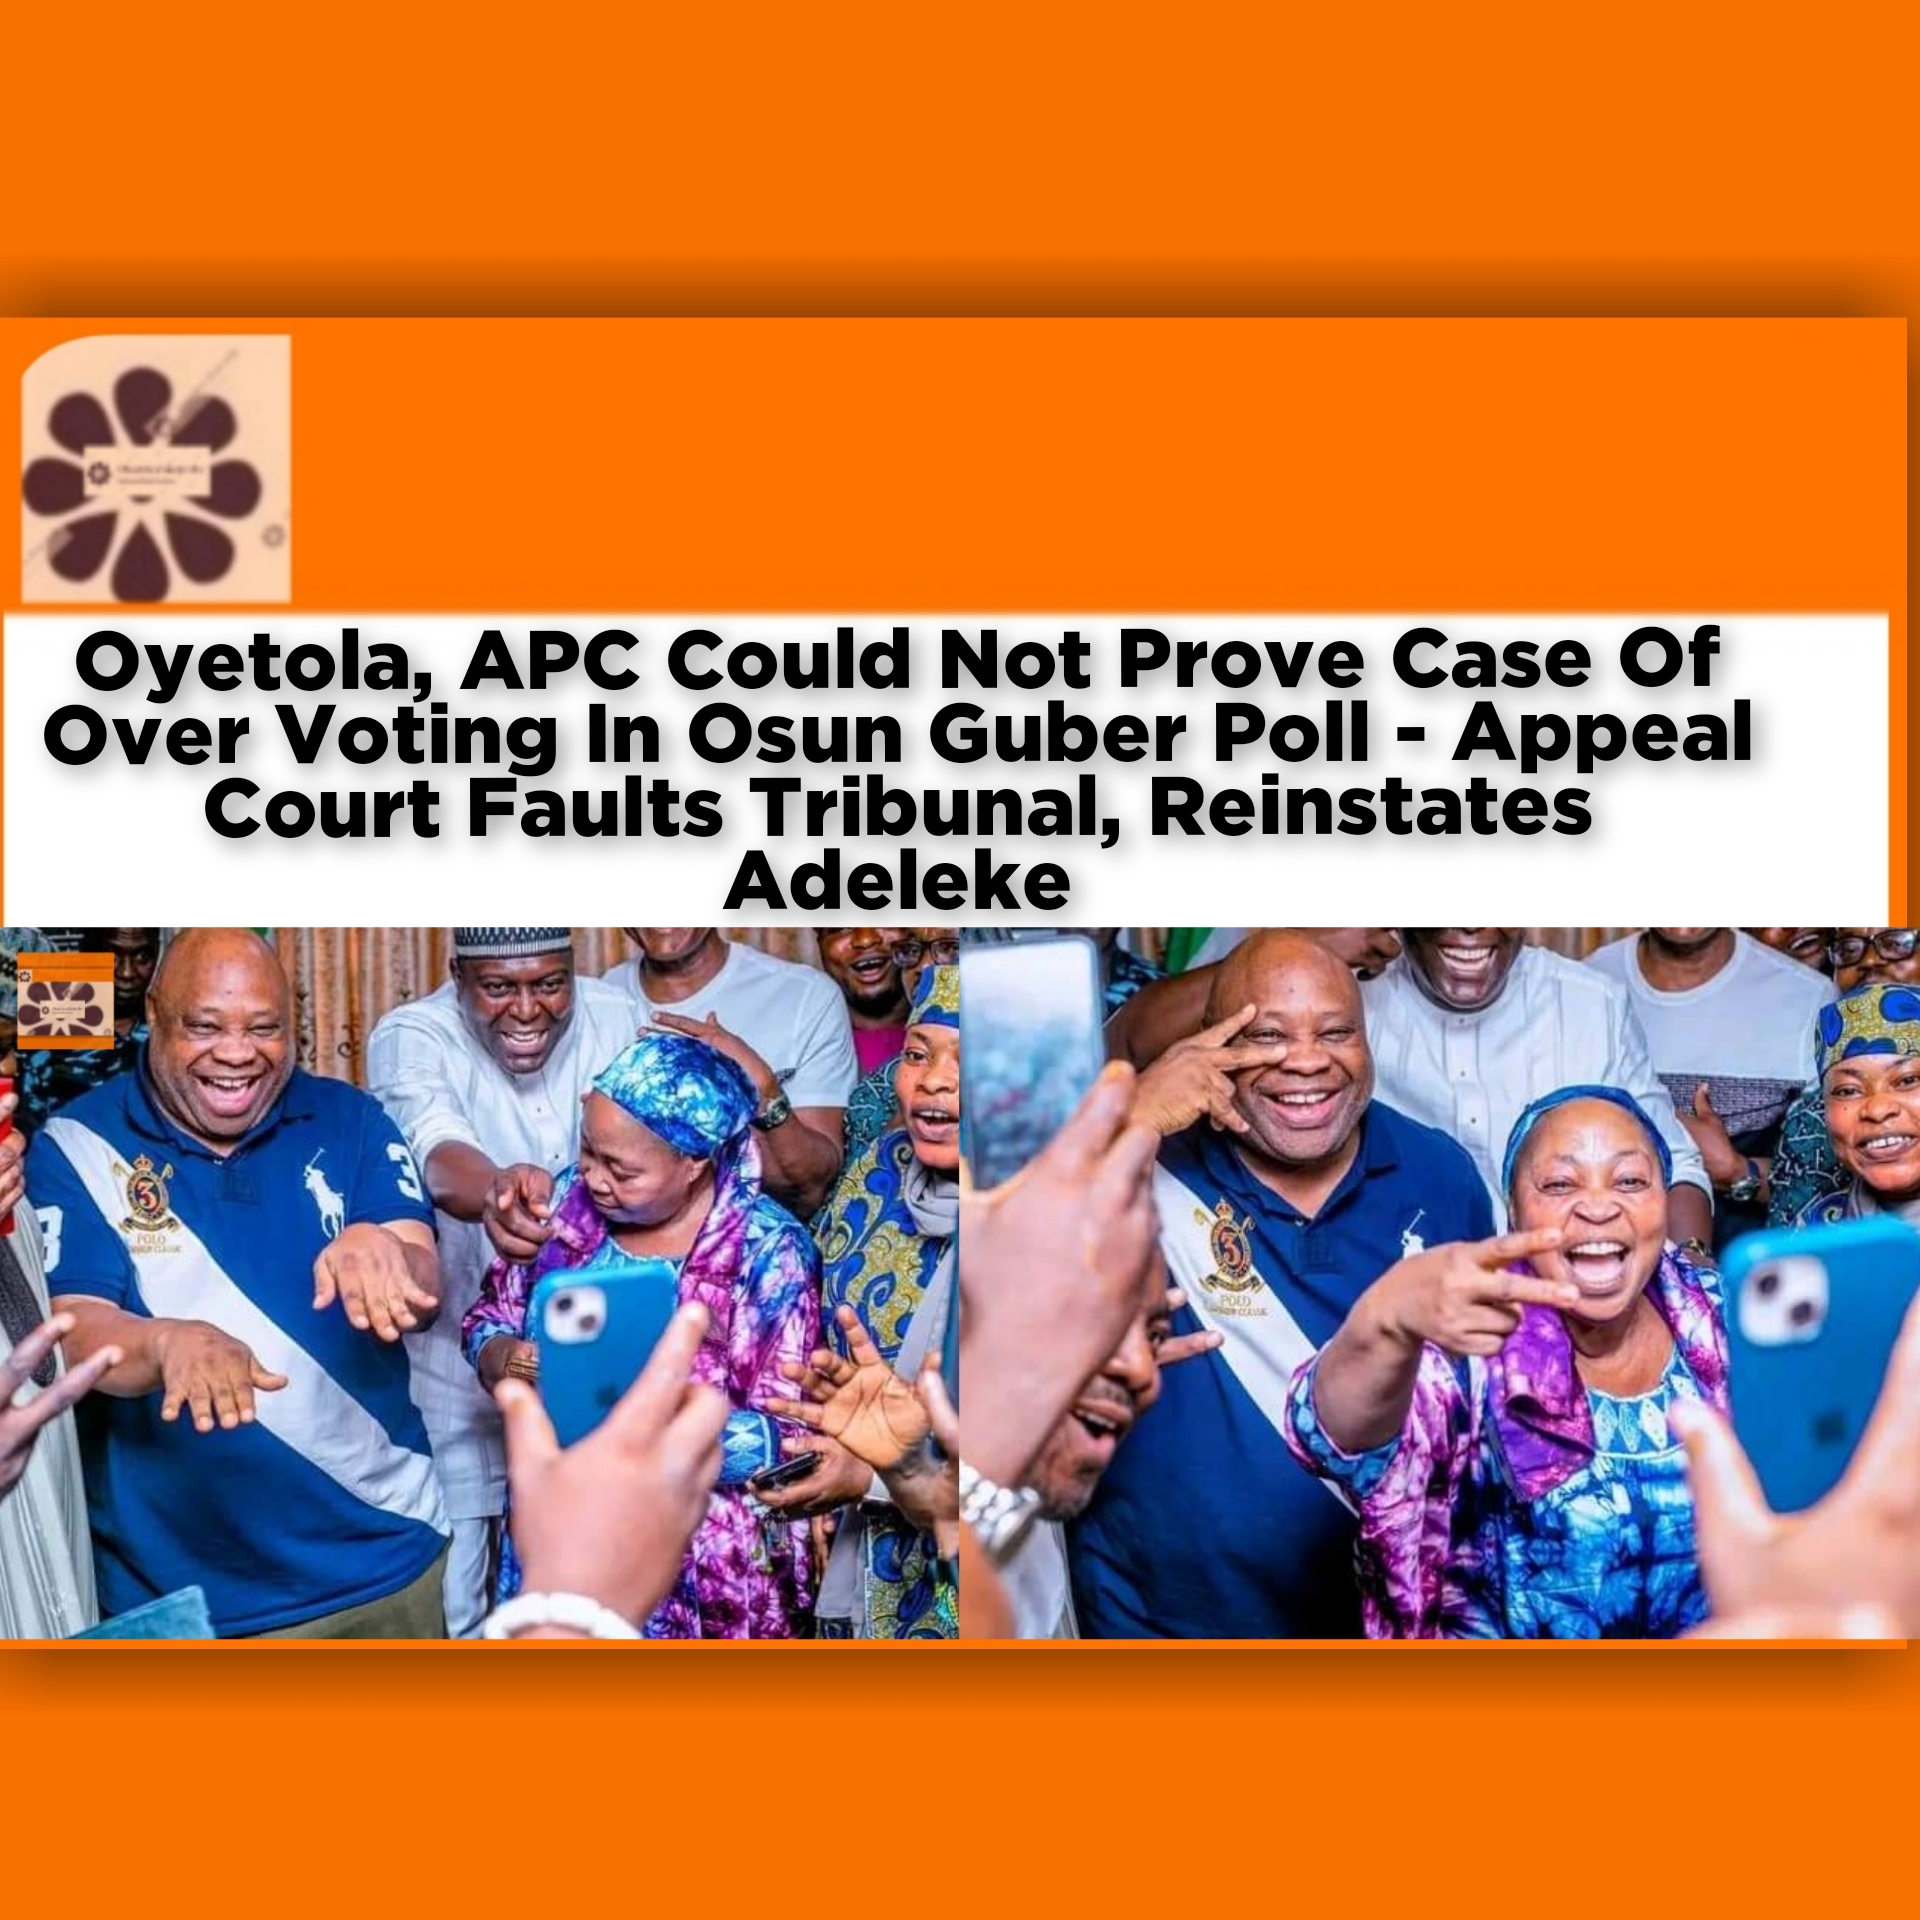 Oyetola, APC Could Not Prove Case Of Over Voting In Osun Guber Poll - Appeal Court Faults Tribunal, Reinstates Adeleke ~ OsazuwaAkonedo #Nigerian